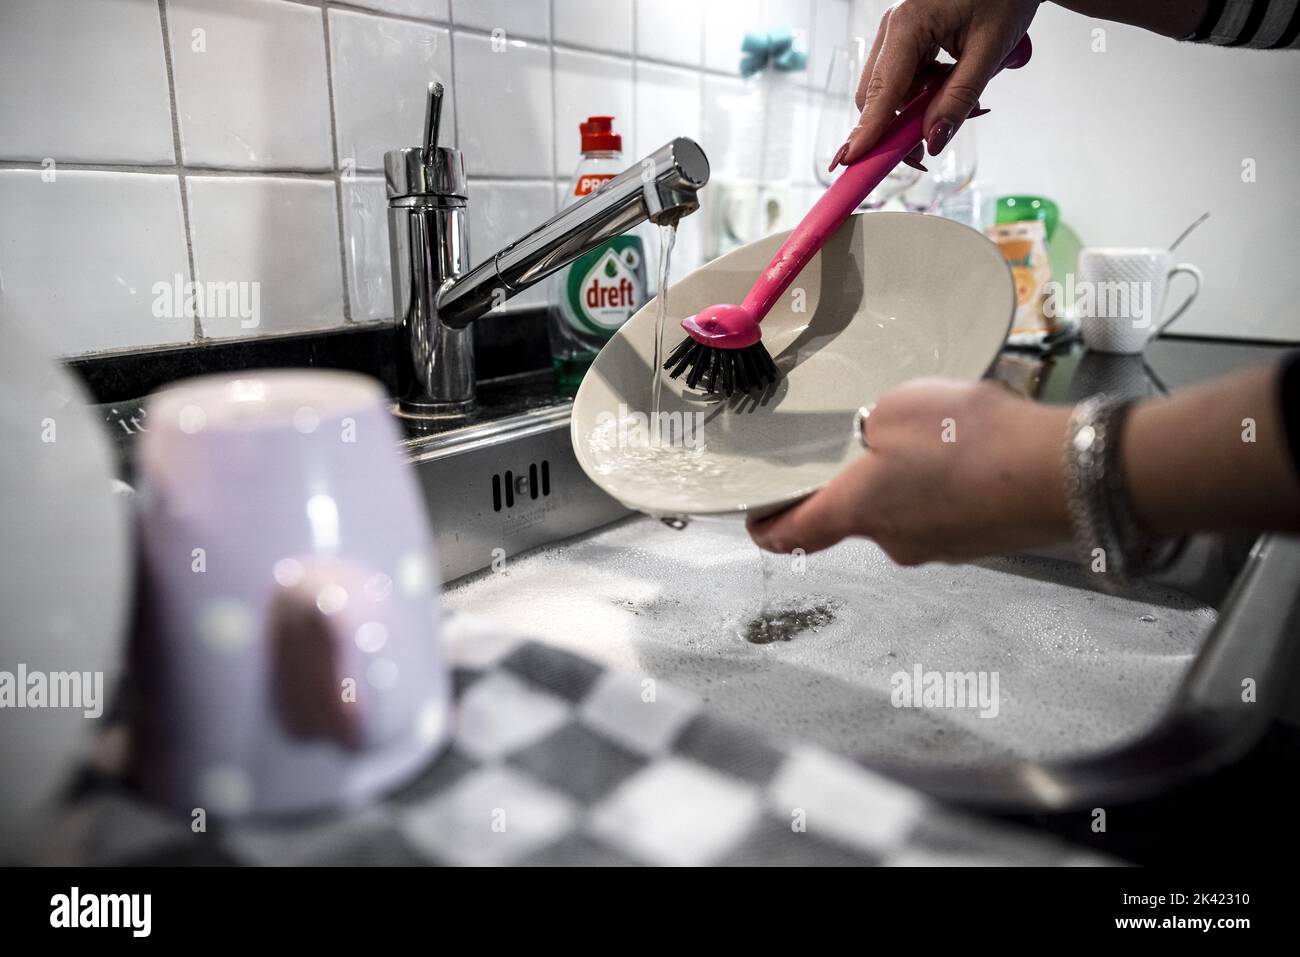 2022-09-29 14:02:27 ILLUSTRATIVE - A woman is washing dishes by hand to save energy. Gas supplies from Russia are declining as a result of the war with Ukraine. ANP ROB ENGELAAR netherlands out - belgium out Stock Photo